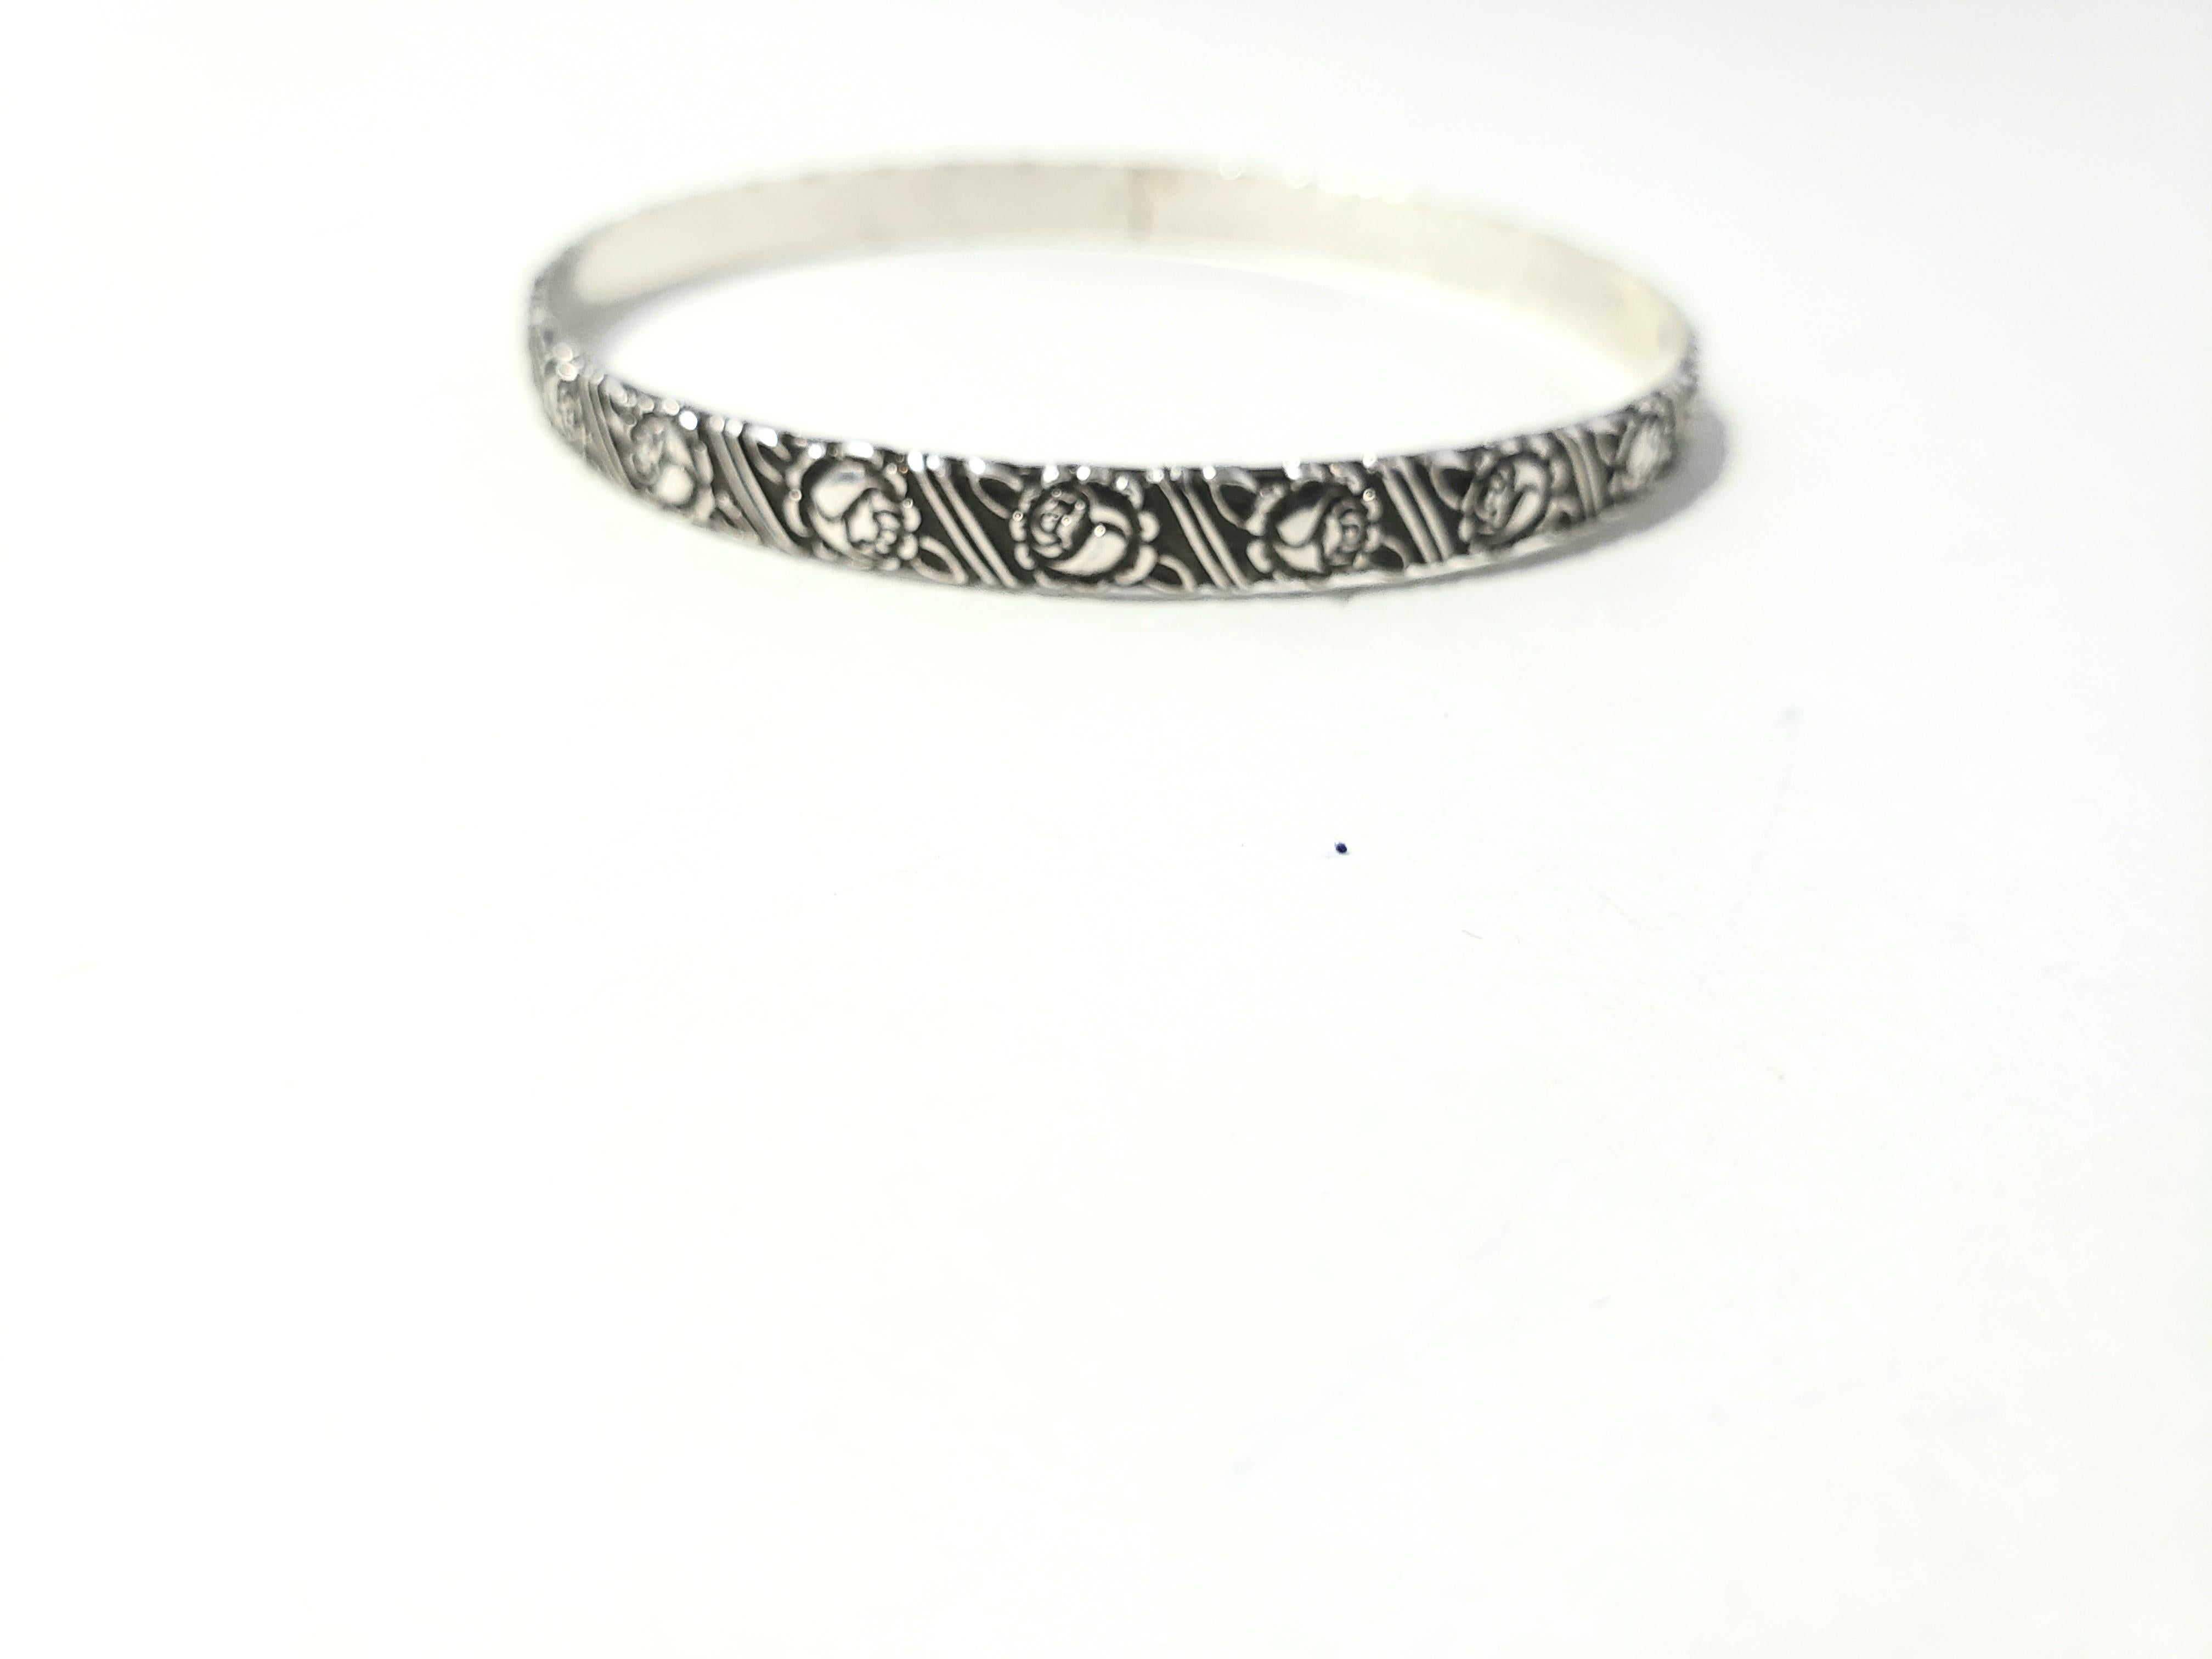 Vintage Beau Sterling Silver Rose Flower Bangle Bracelet

This is a lovely sterling silver rose flower bangle bracelet by Beau.  

Measurements:     Measures 7 3/4 on bracelet cone.   Measures 2 and 1/2 inches across in diameter.  
 
Weight:  12.7 g